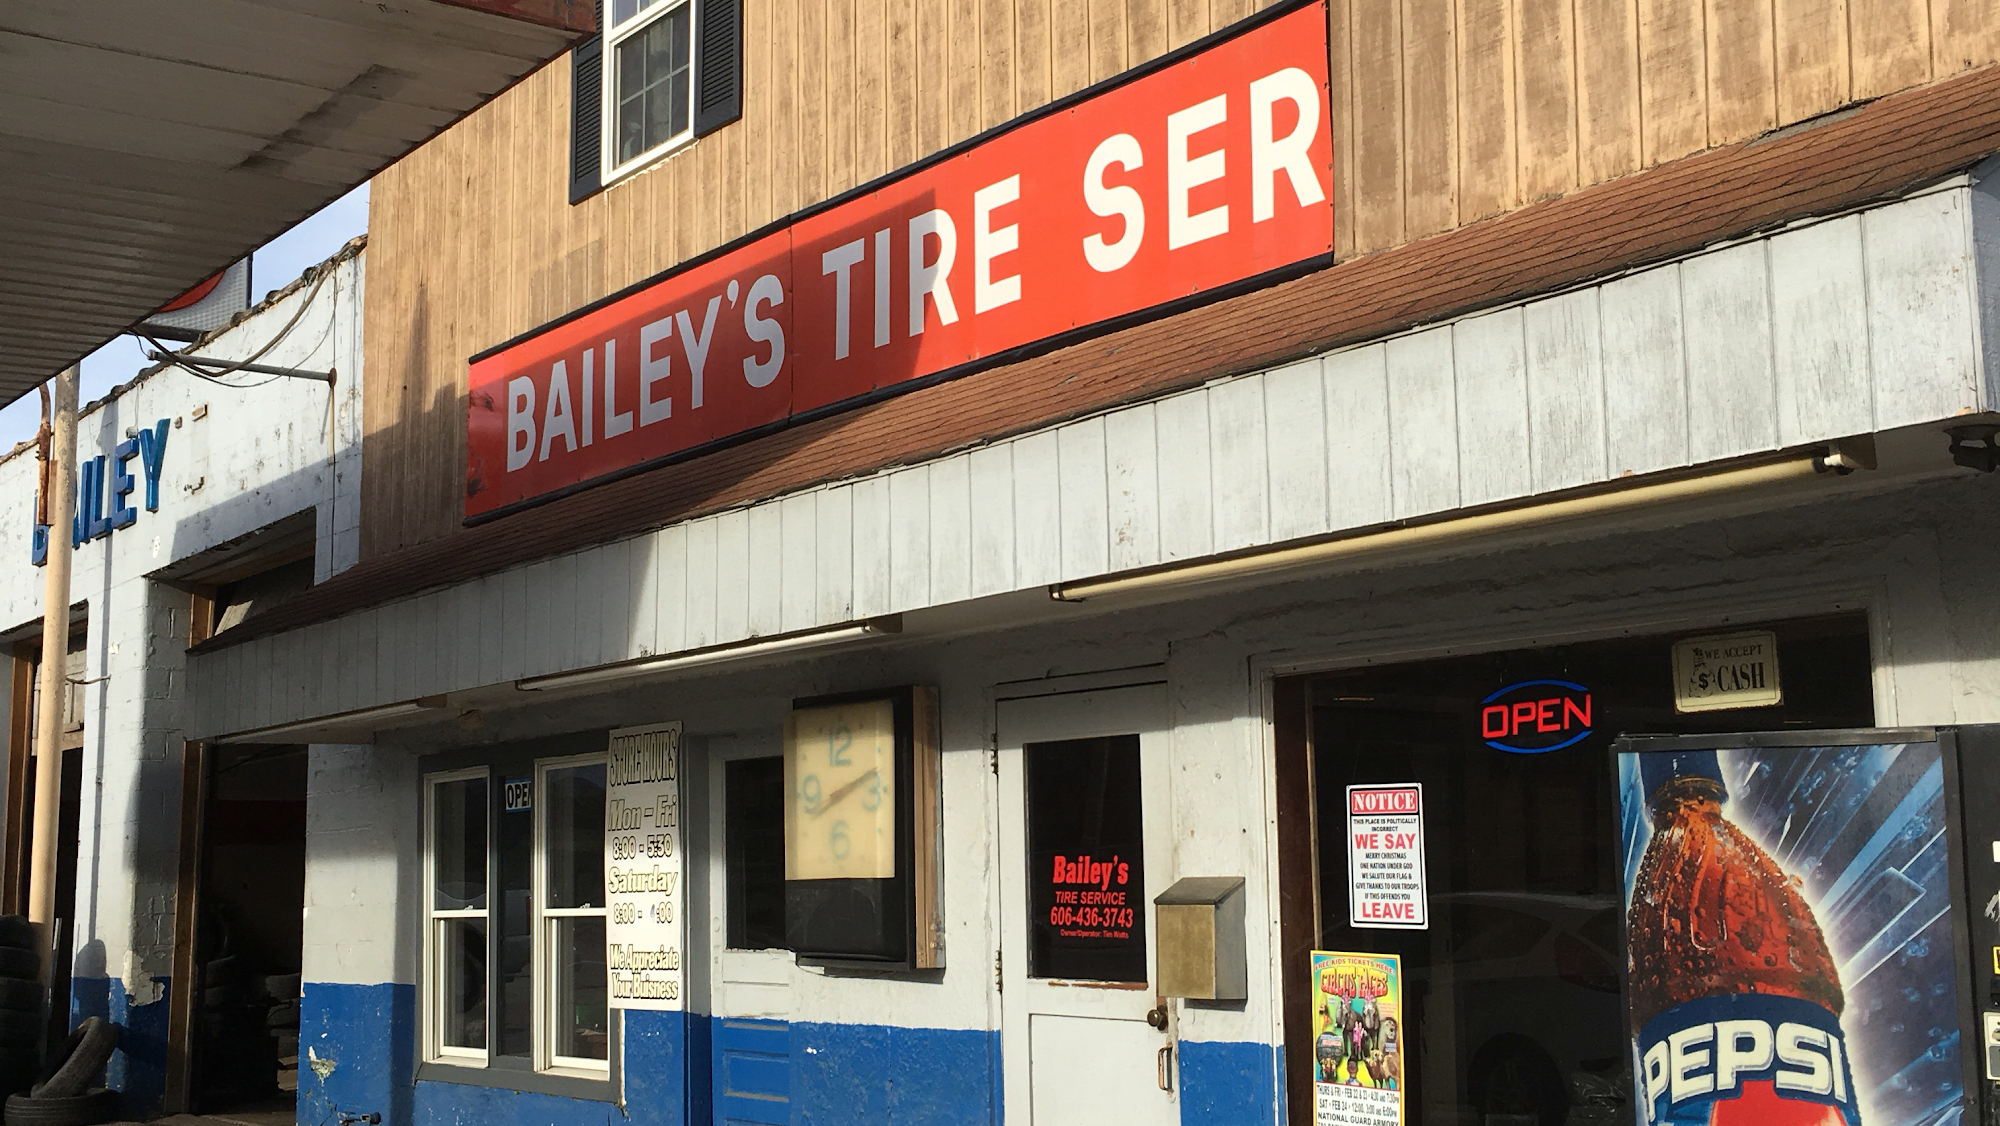 Bailey's Tire Services